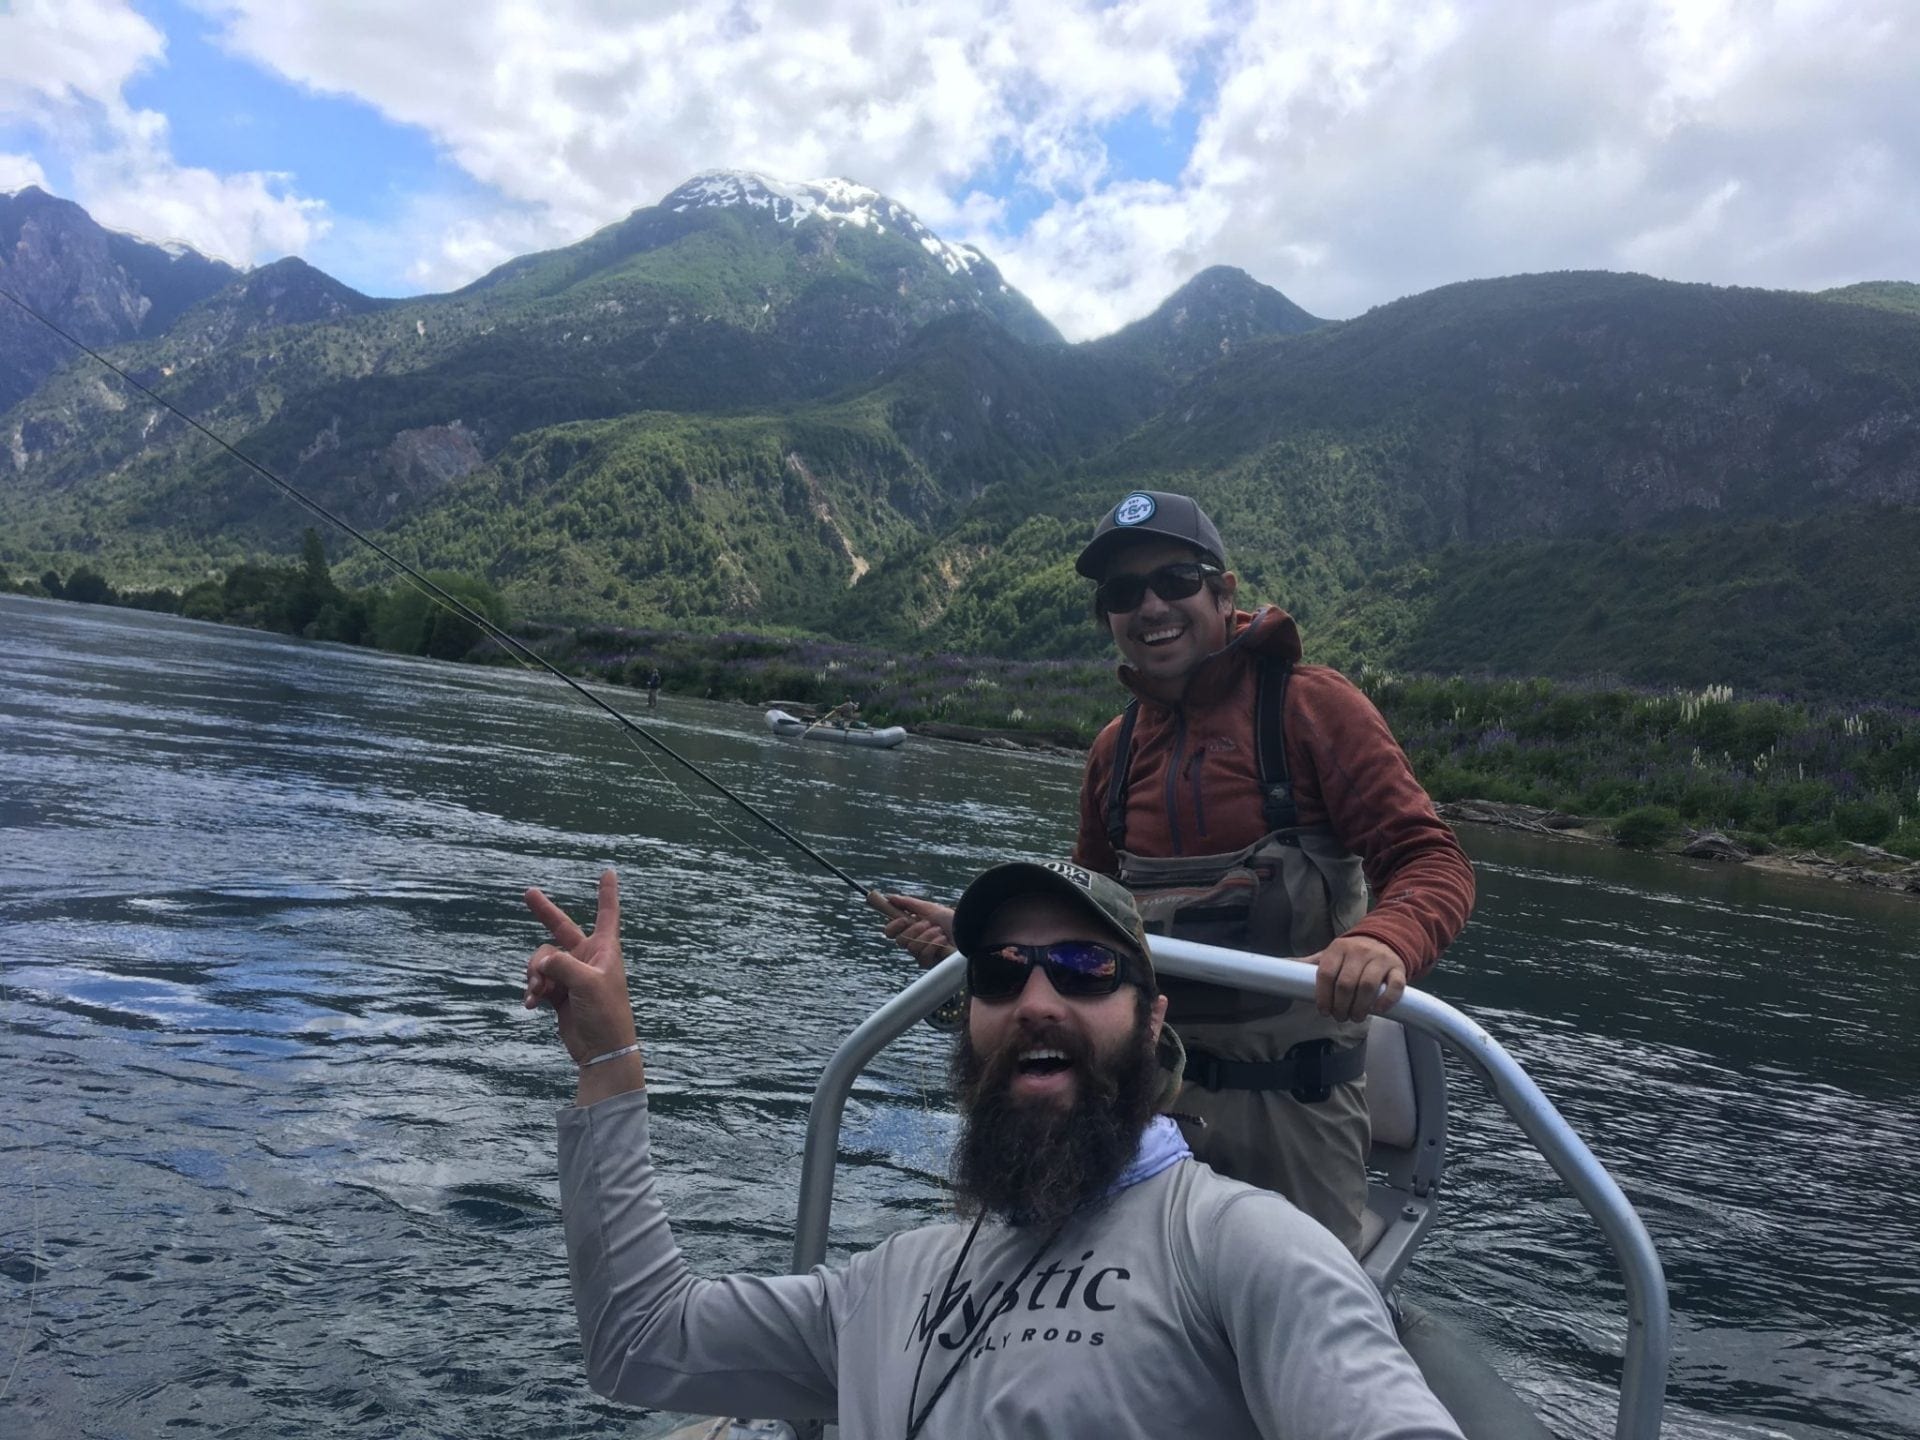 Best Time to Fly Fish in Chile-Patagonia » Outdoors International